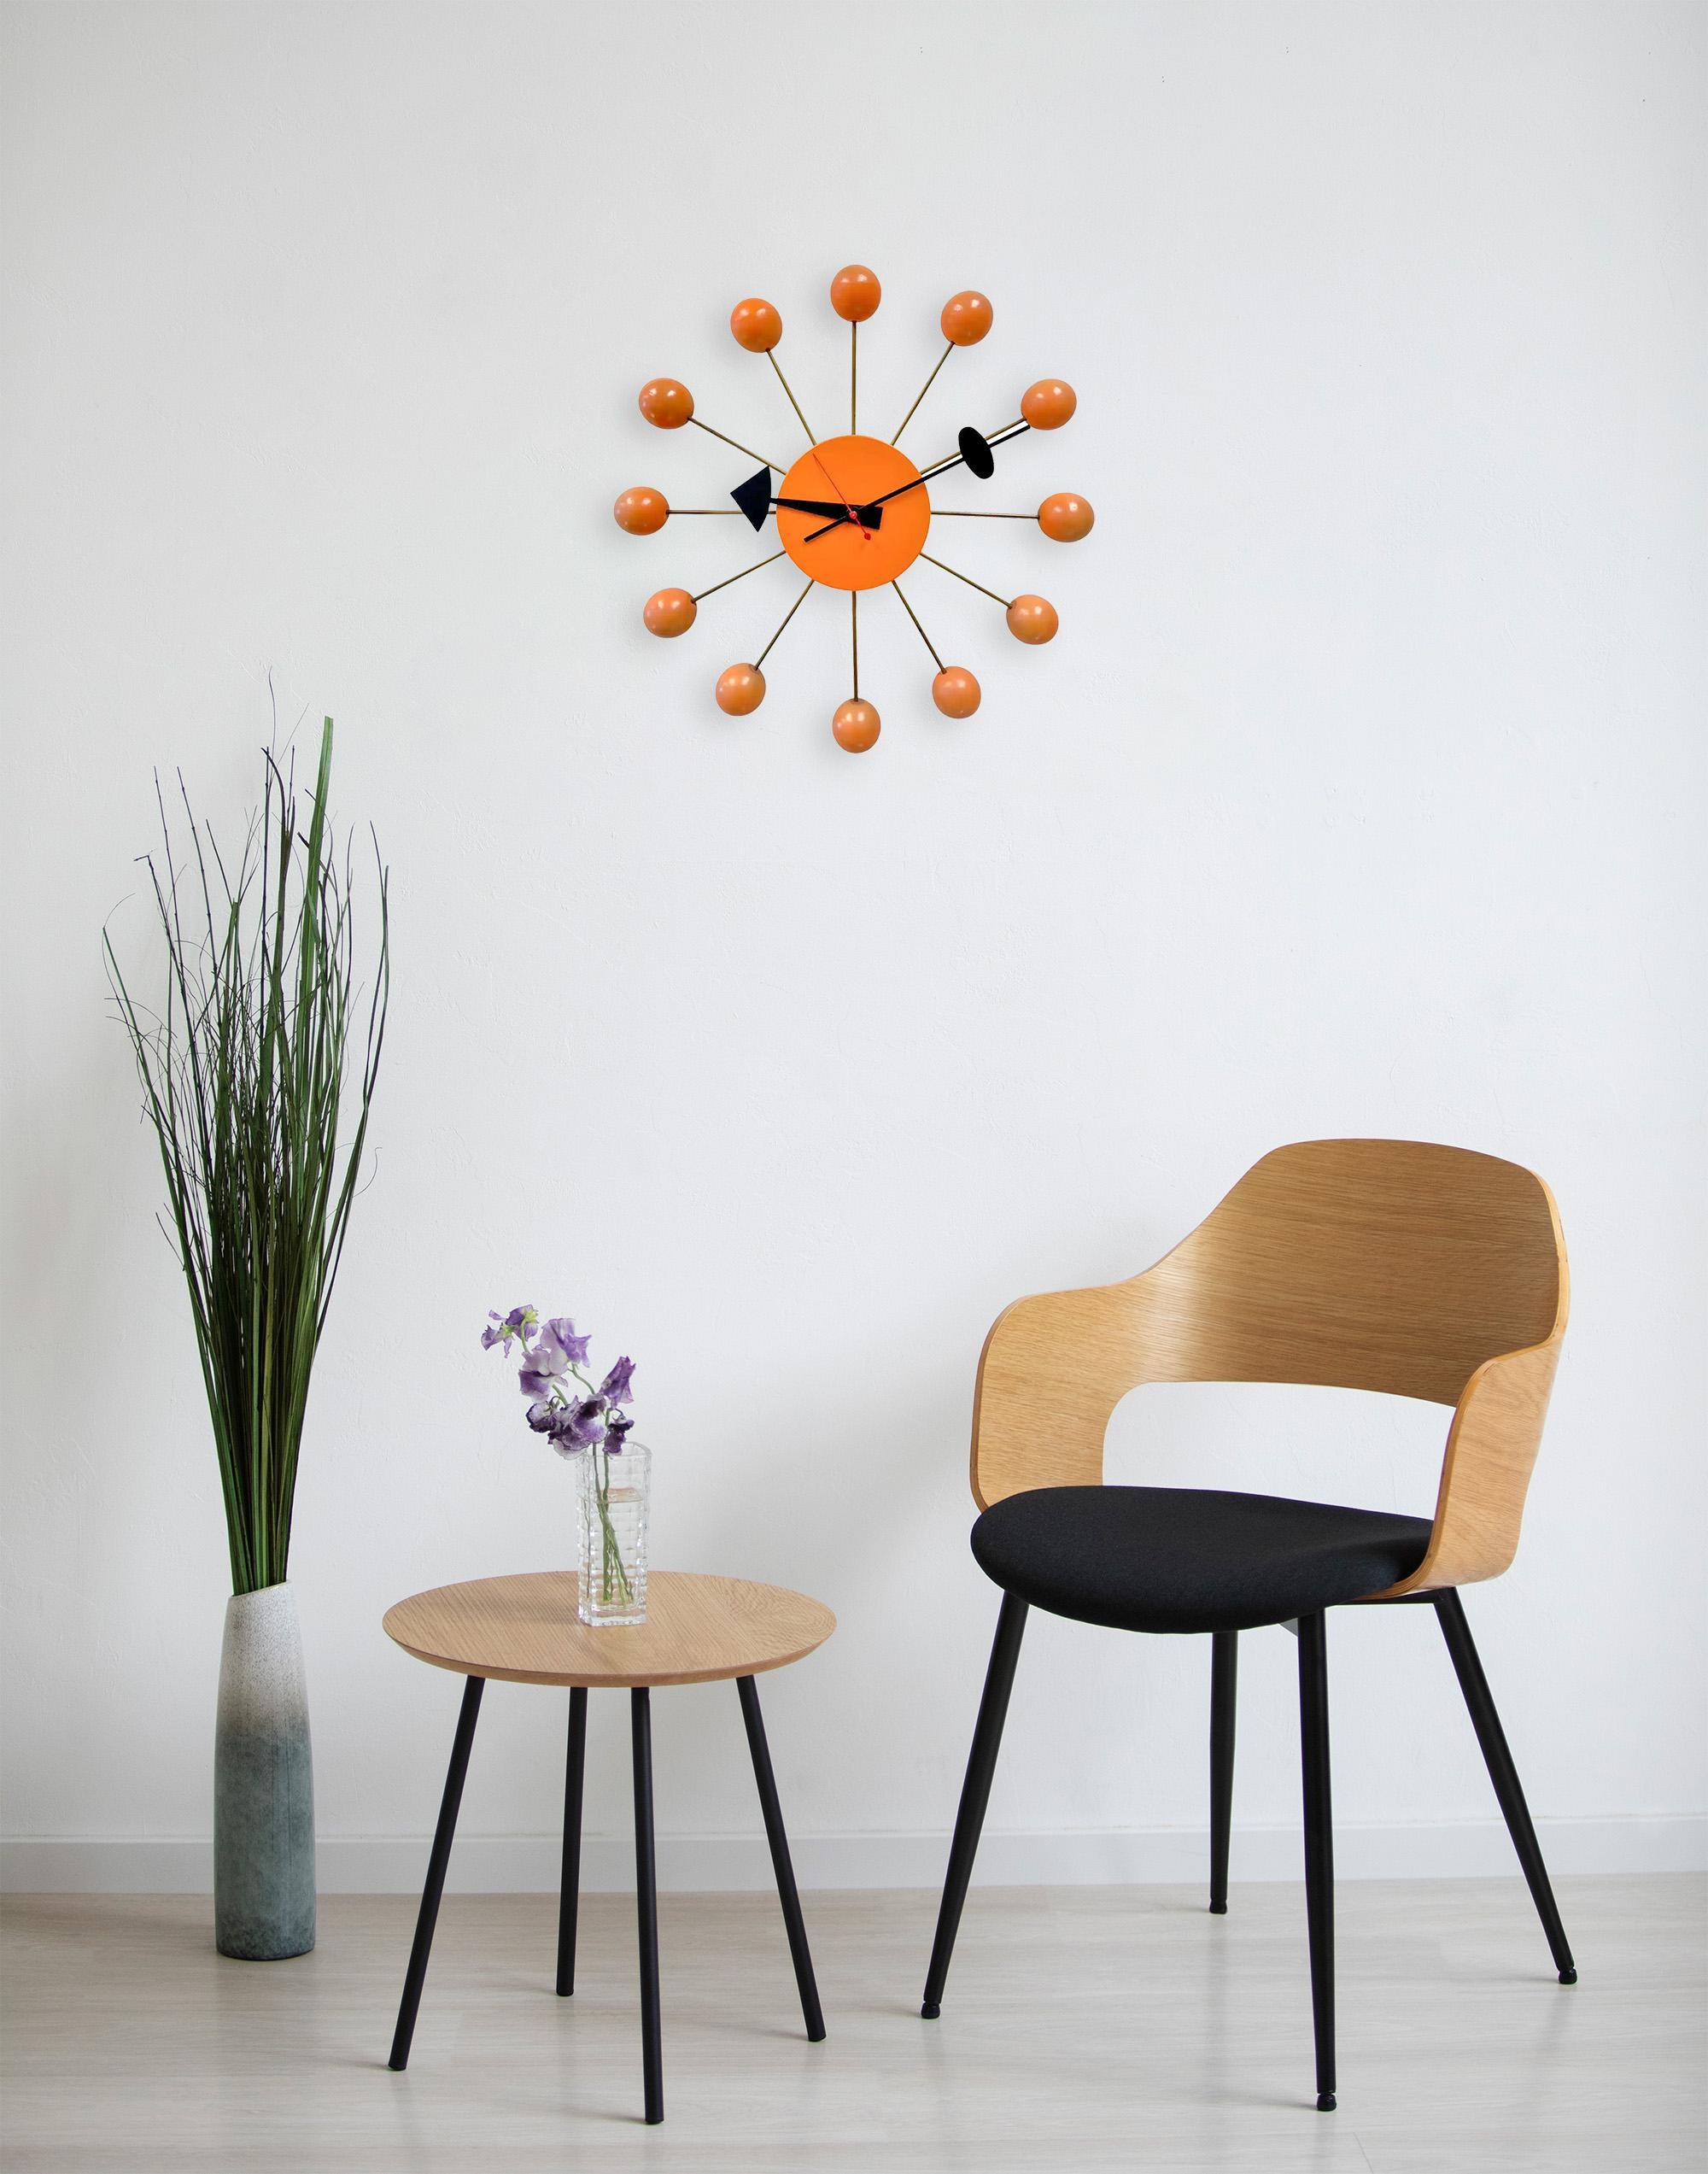 An original George Nelson ( 1908- 1986)  Mid Century Modern Ball Clock model 4755.  This iconic clock features a distinctive and modern design with a mid-century aesthetic. The central face is a solid orange circle from which twelve metal rods